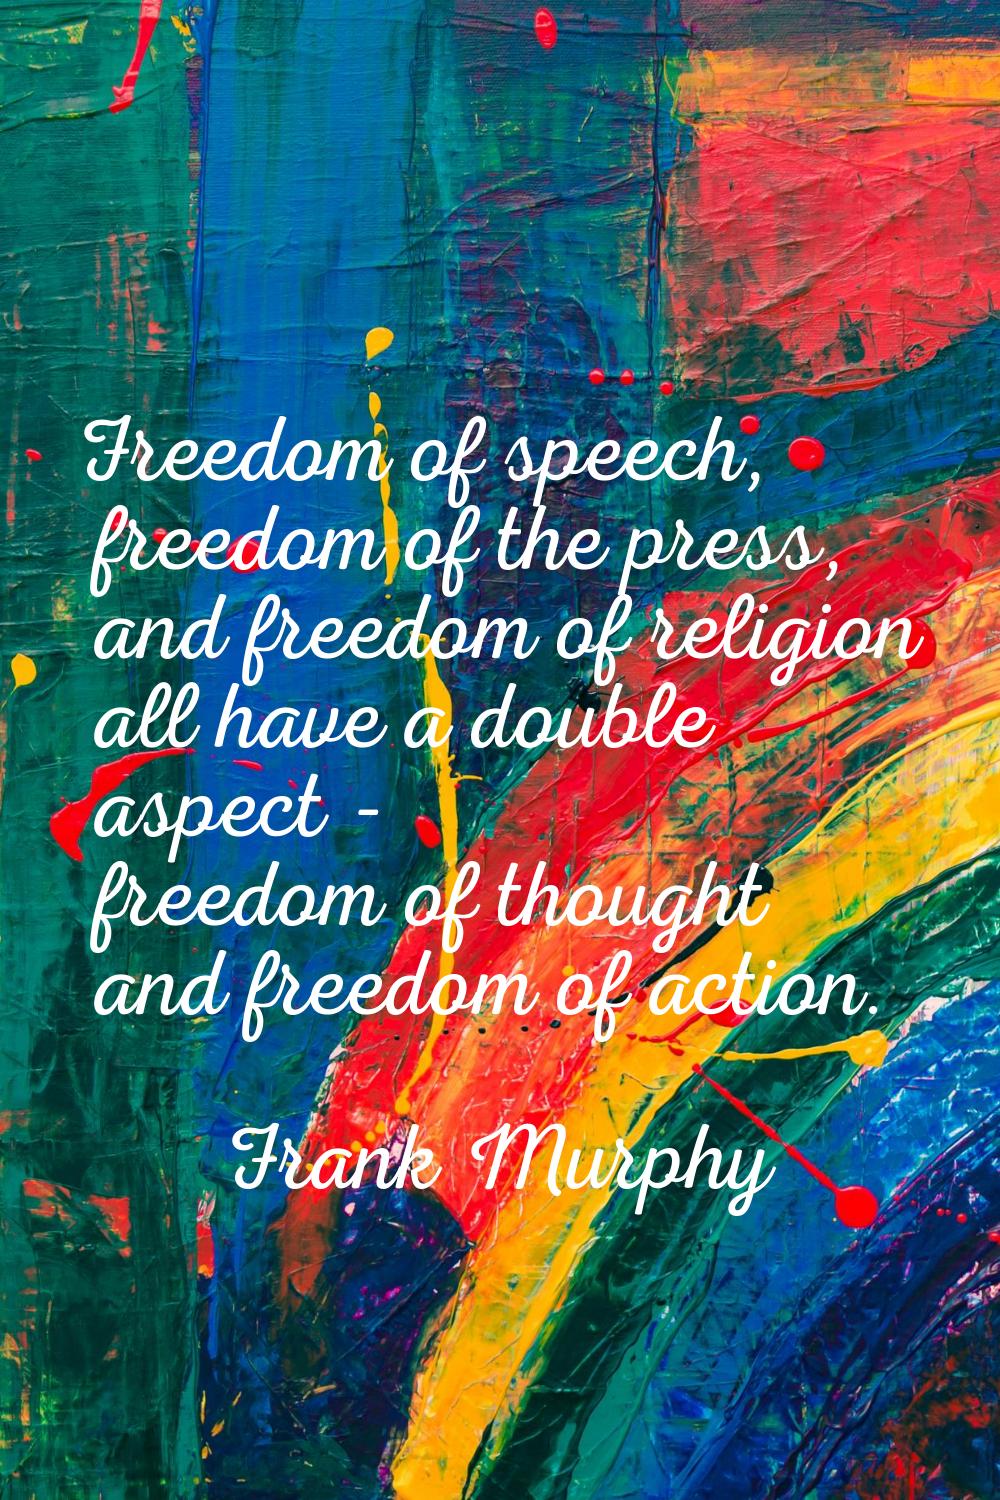 Freedom of speech, freedom of the press, and freedom of religion all have a double aspect - freedom